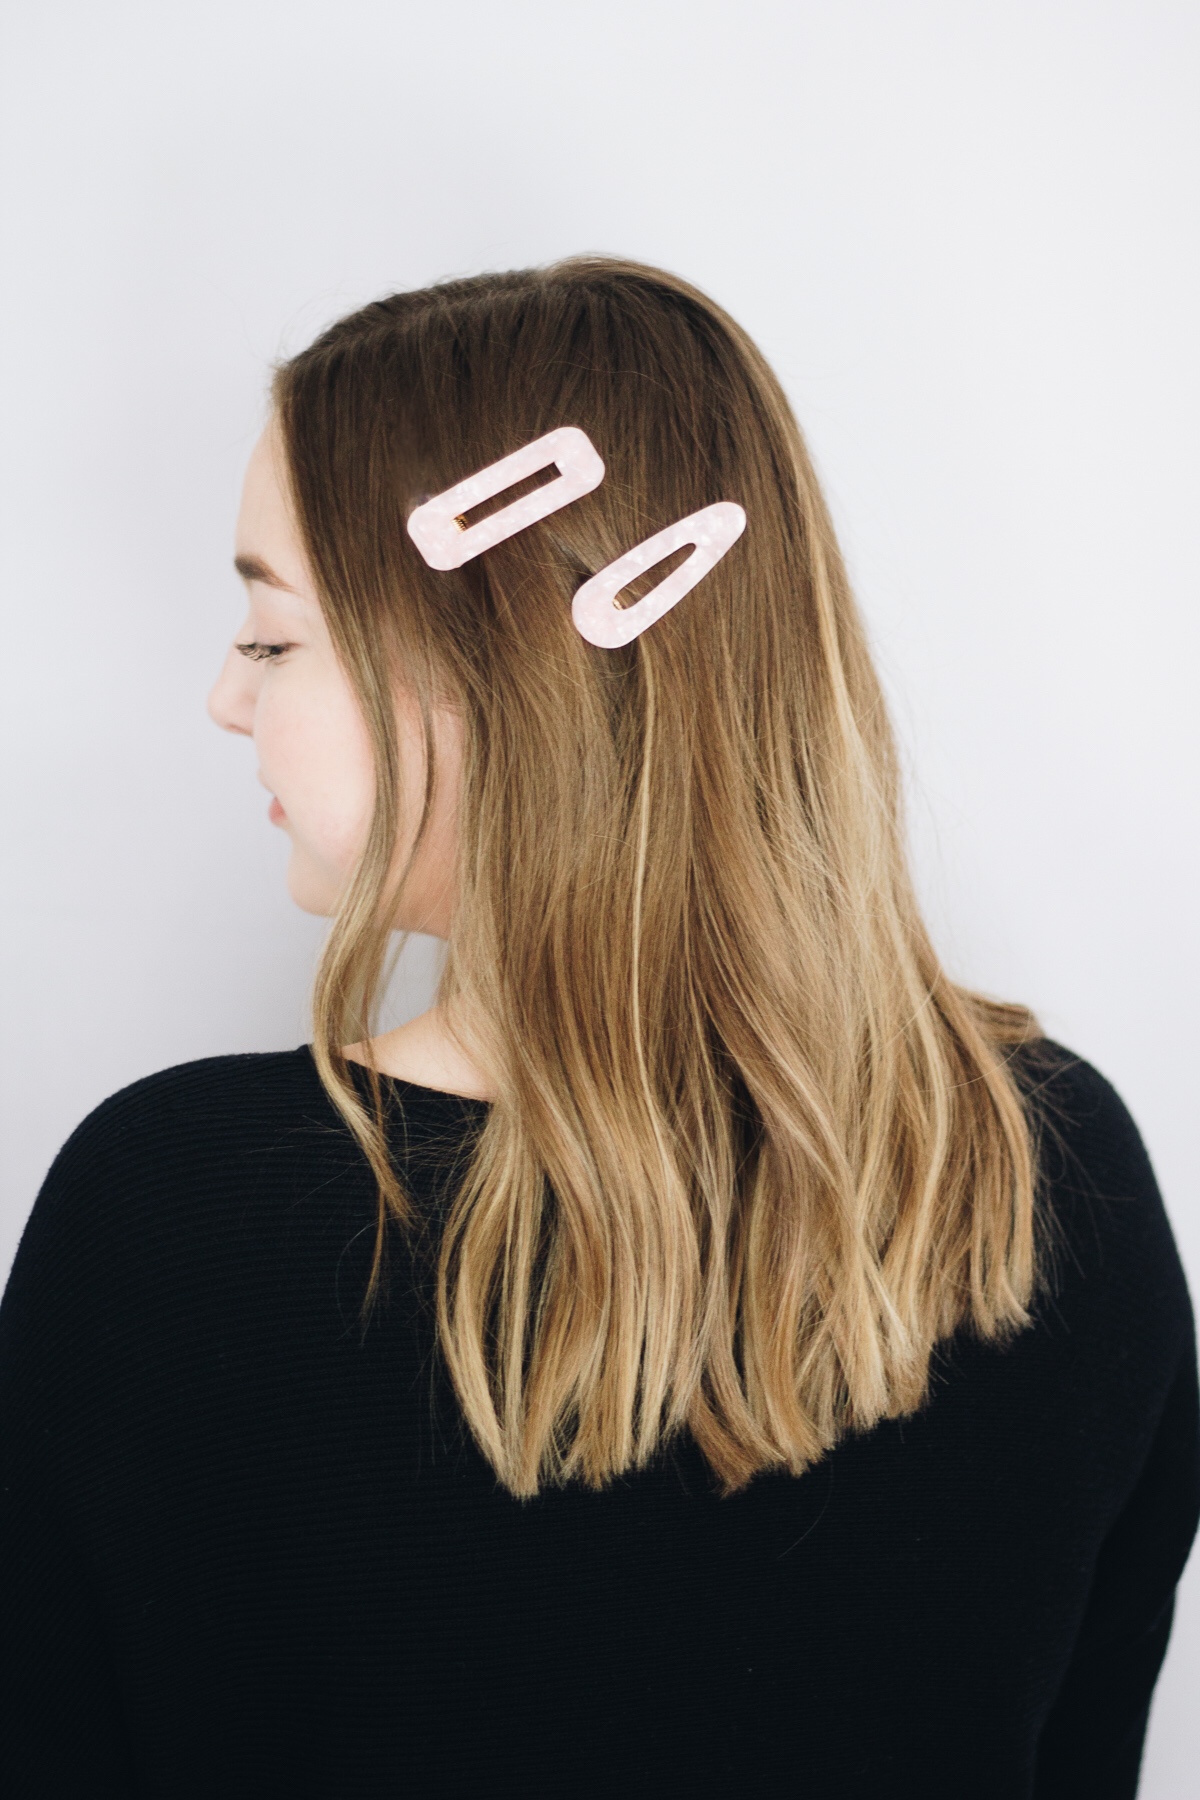 5-Minute Hairstyles for the Girl On-the-Go